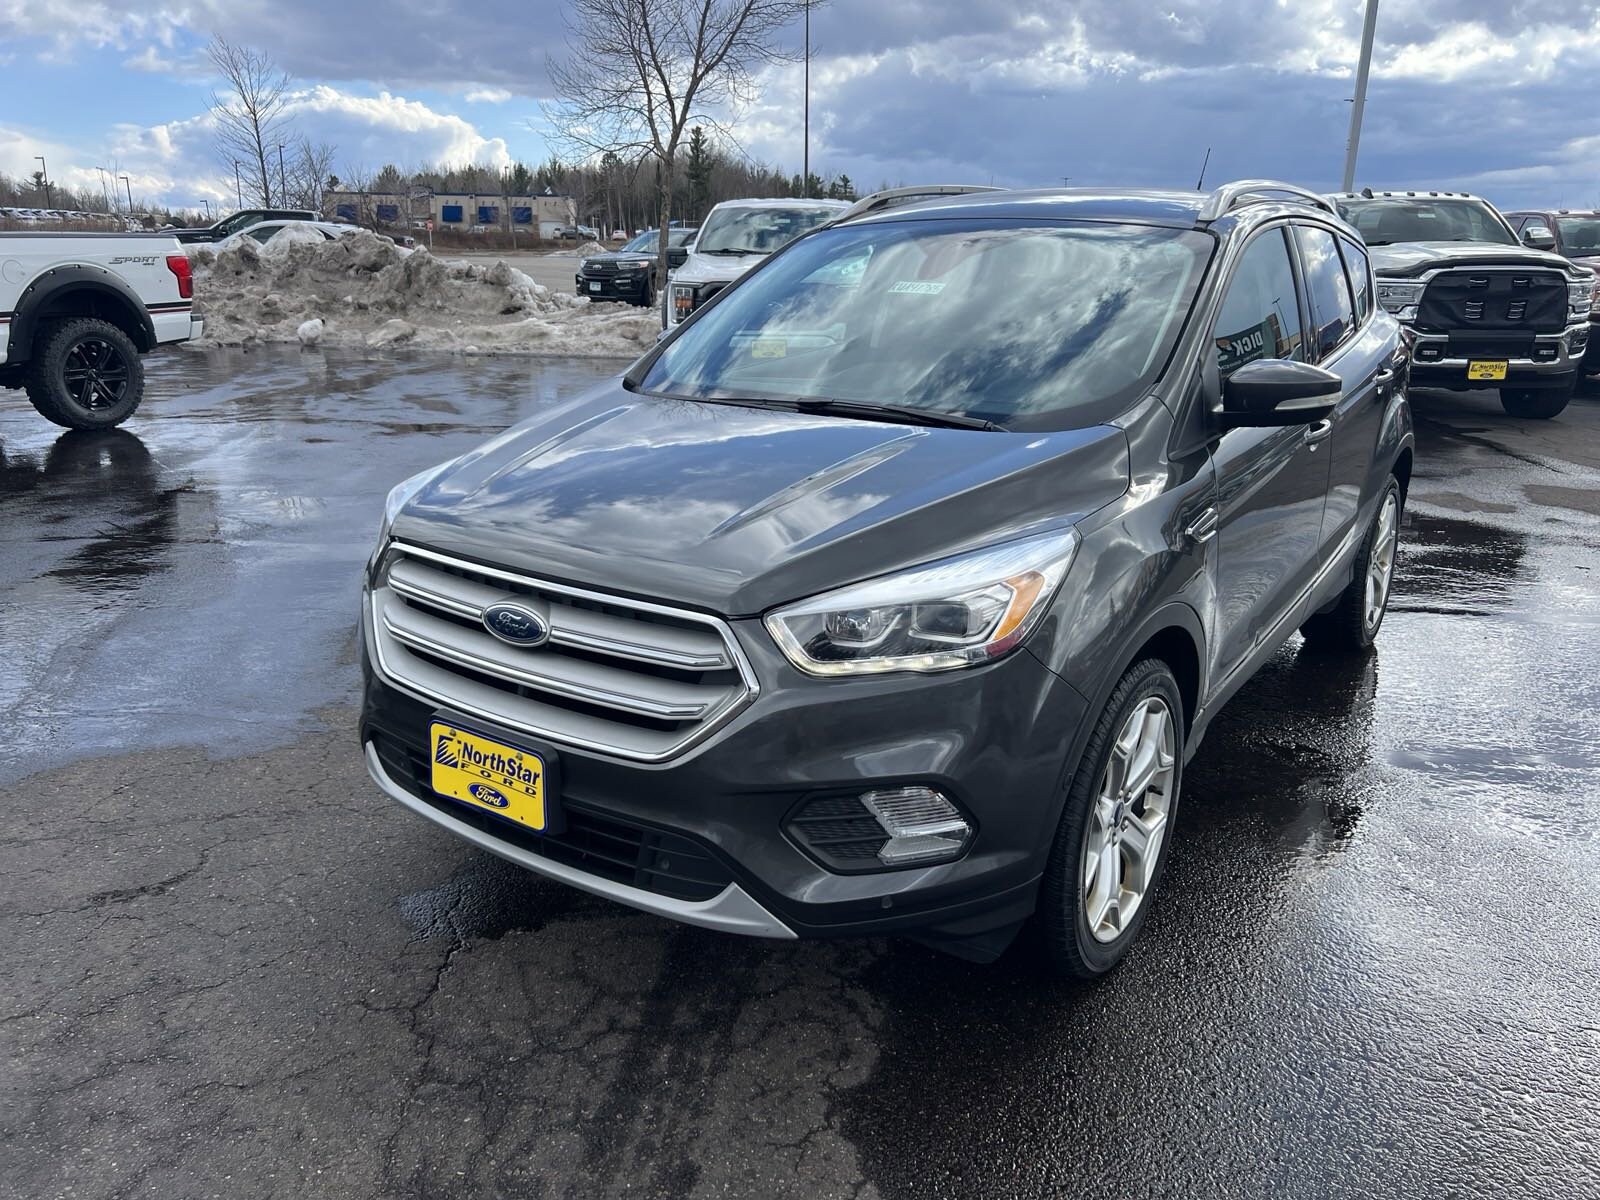 Used 2019 Ford Escape Titanium with VIN 1FMCU9J99KUA41785 for sale in Duluth, Minnesota